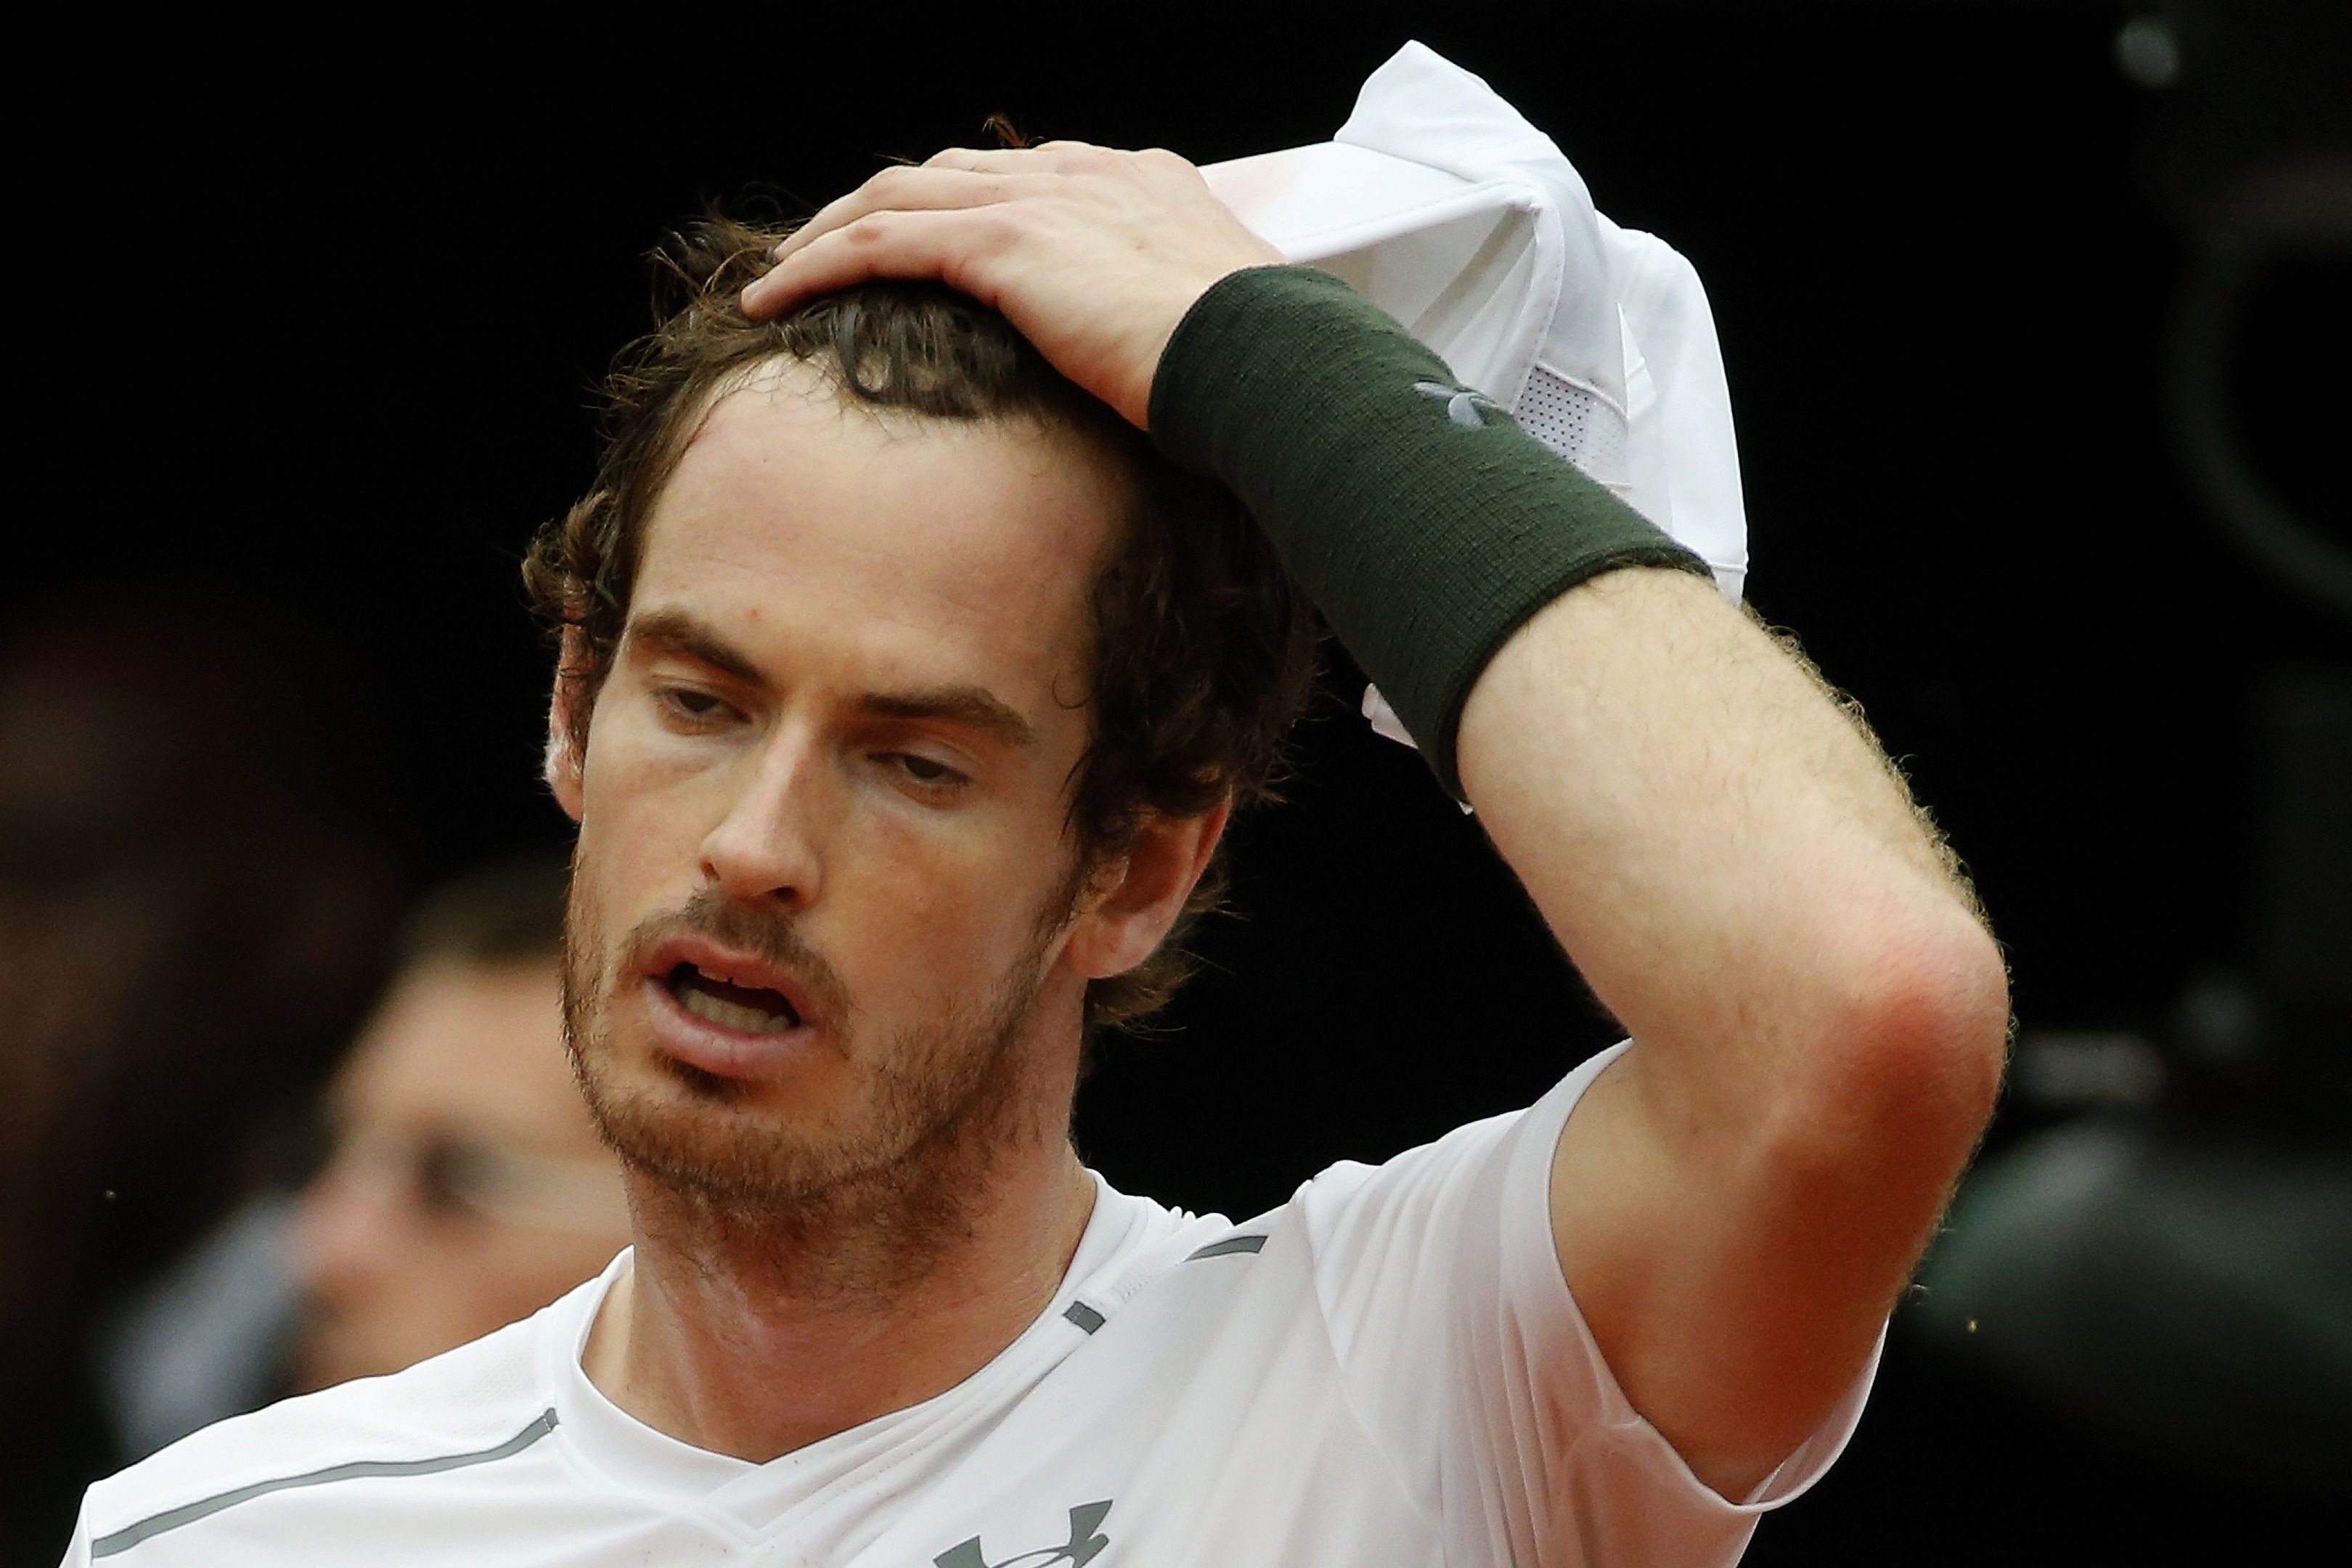 Andy Murray has lost to Novak Djokovic in the finalof the French Open.